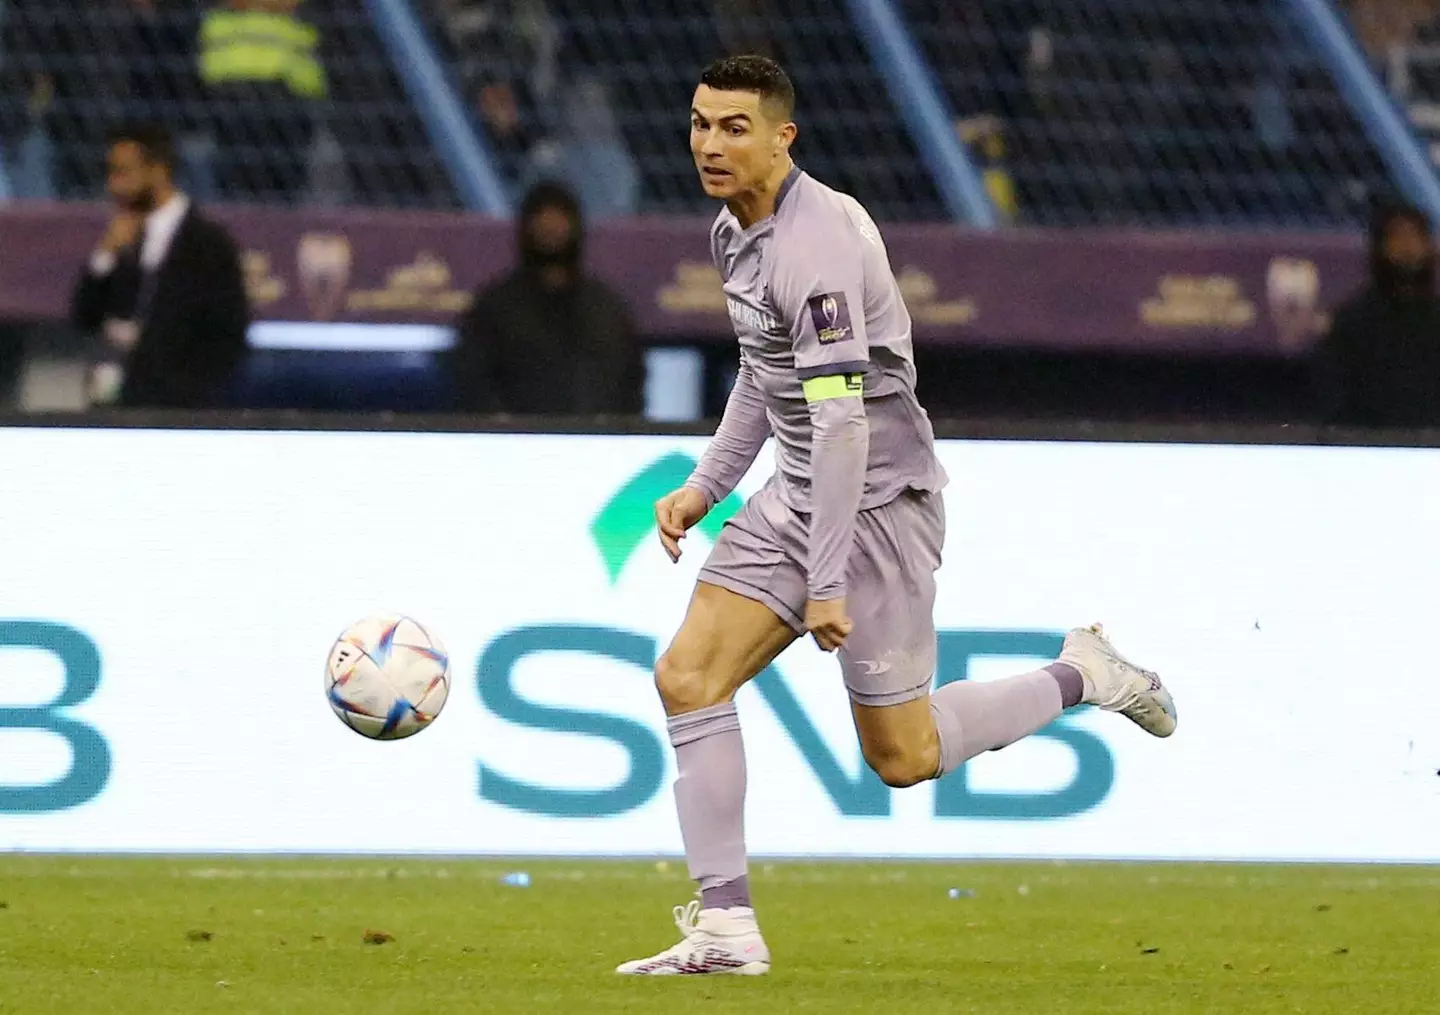 Al Nassr's opponents are upping their games in order to stop Ronaldo. Image: Alamy